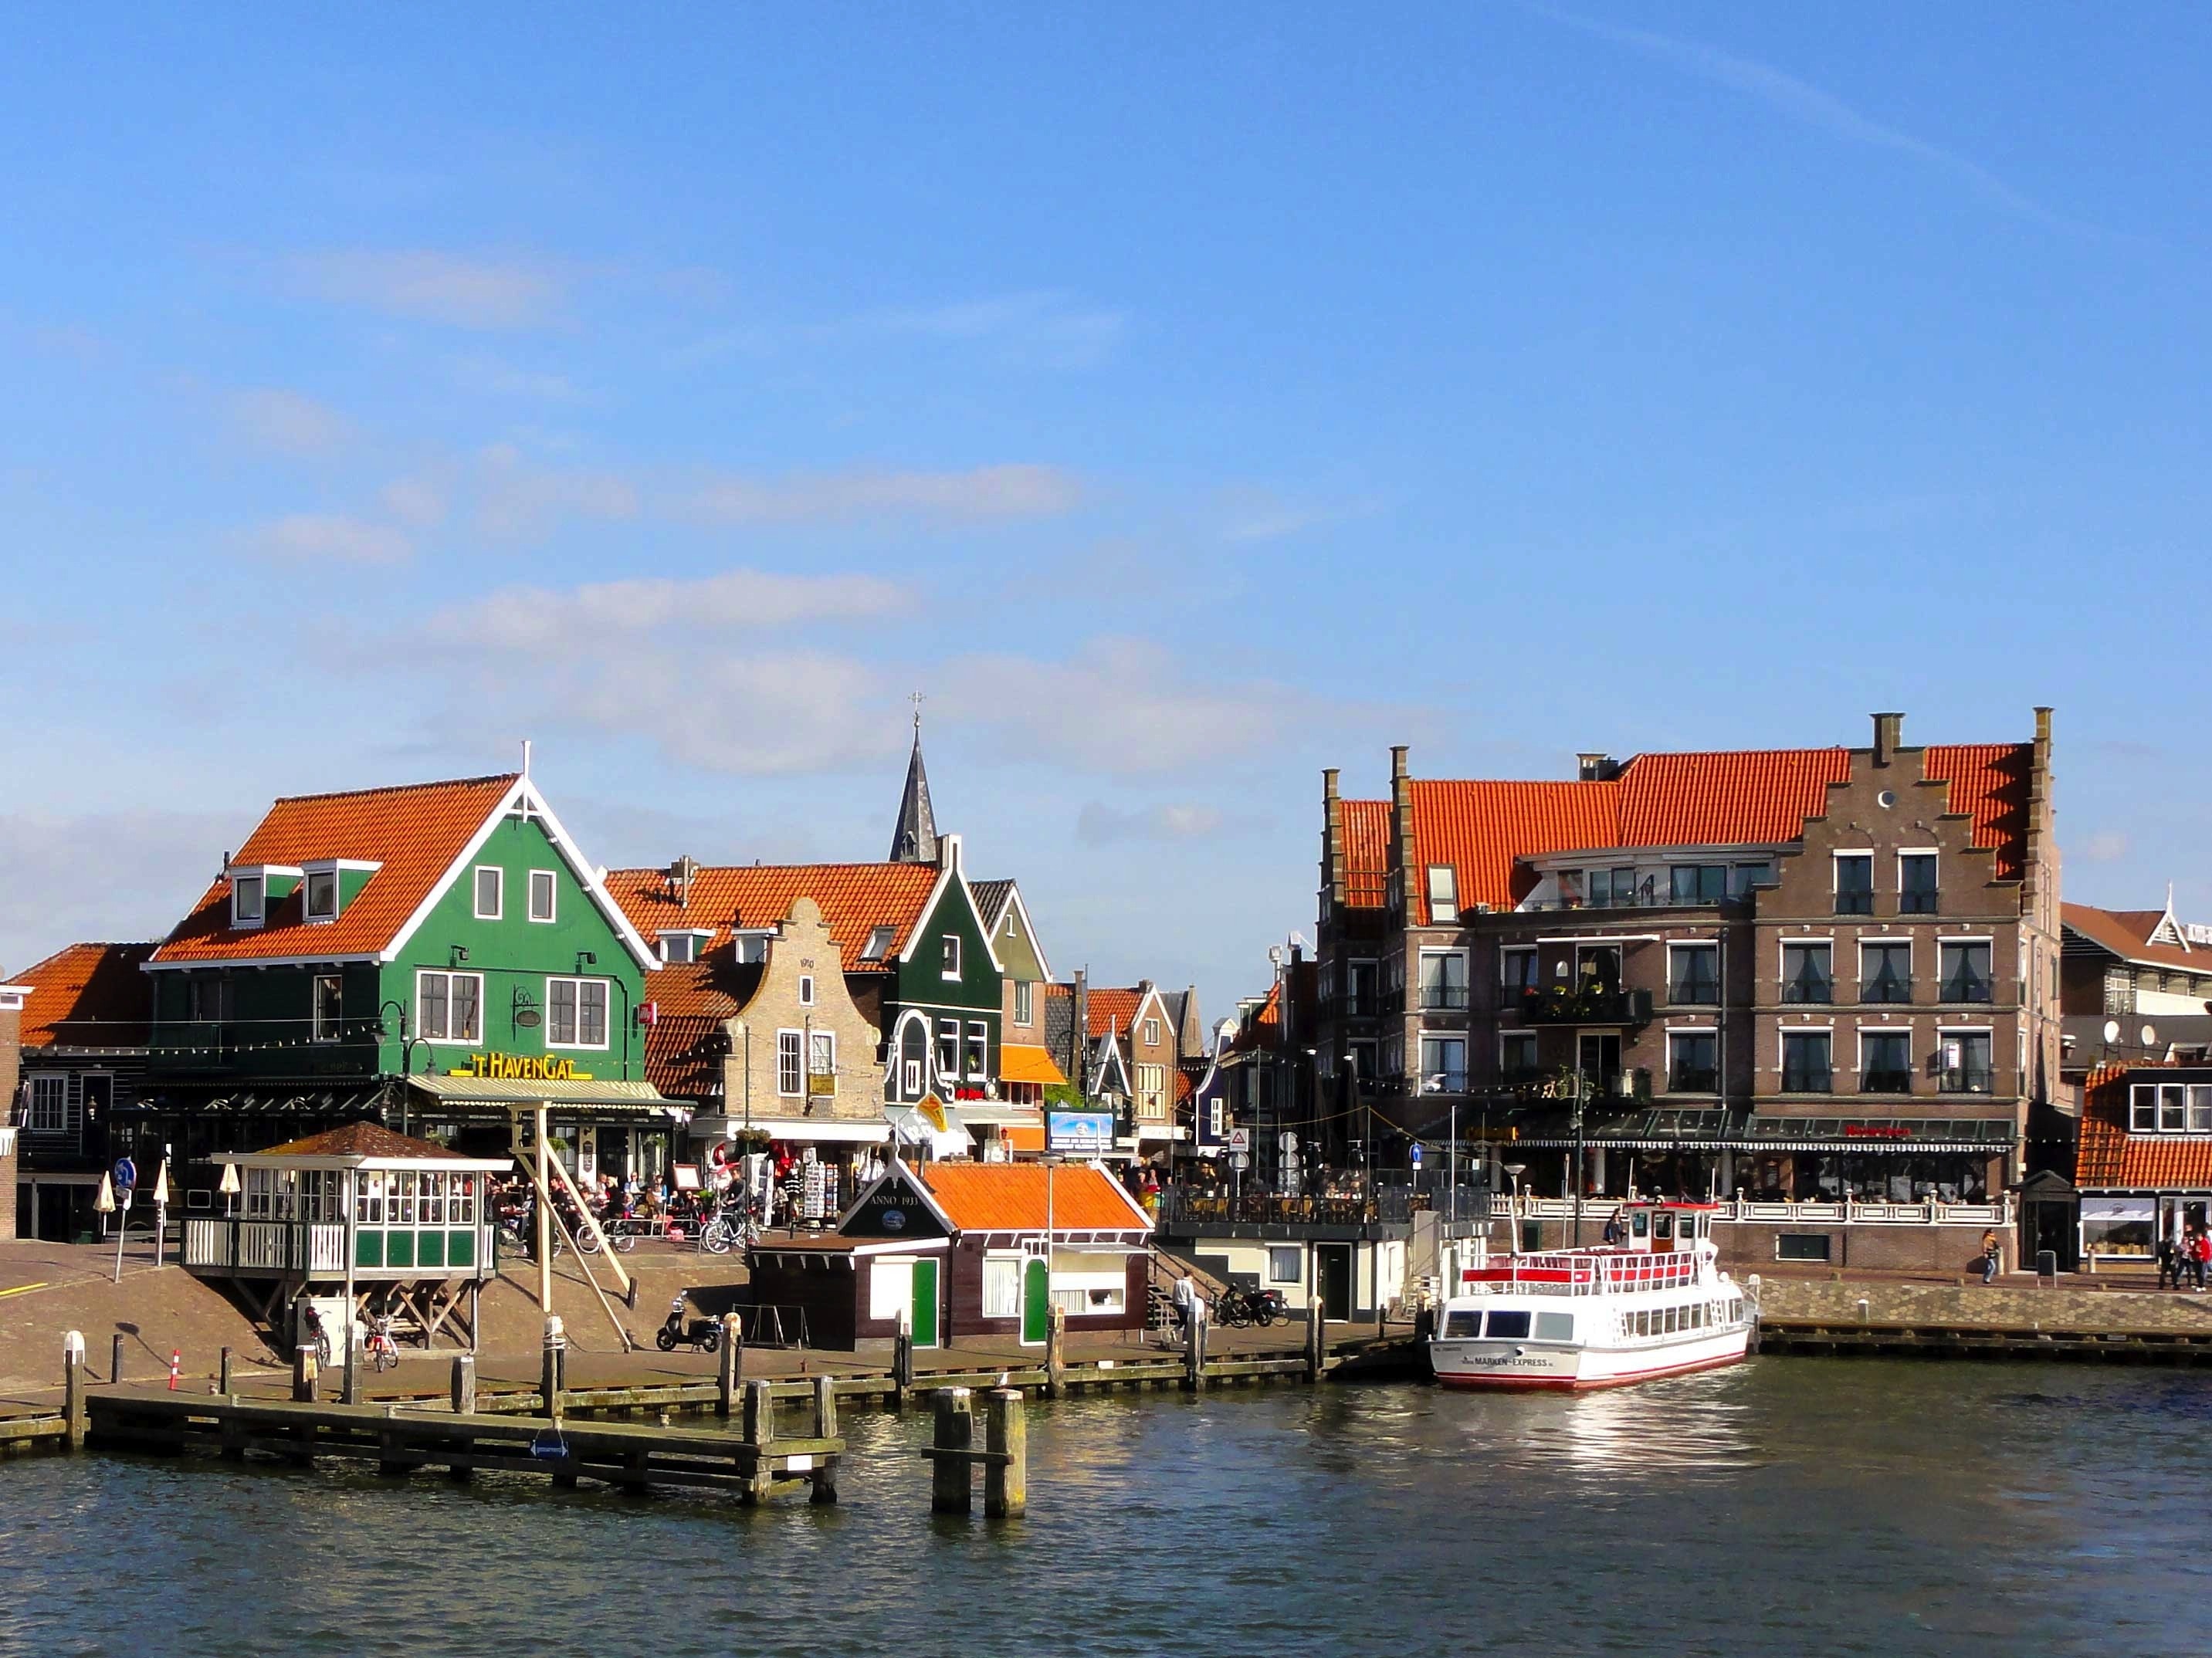 Clouds, Sky, Boats, Netherlands, Ships, building exterior, house